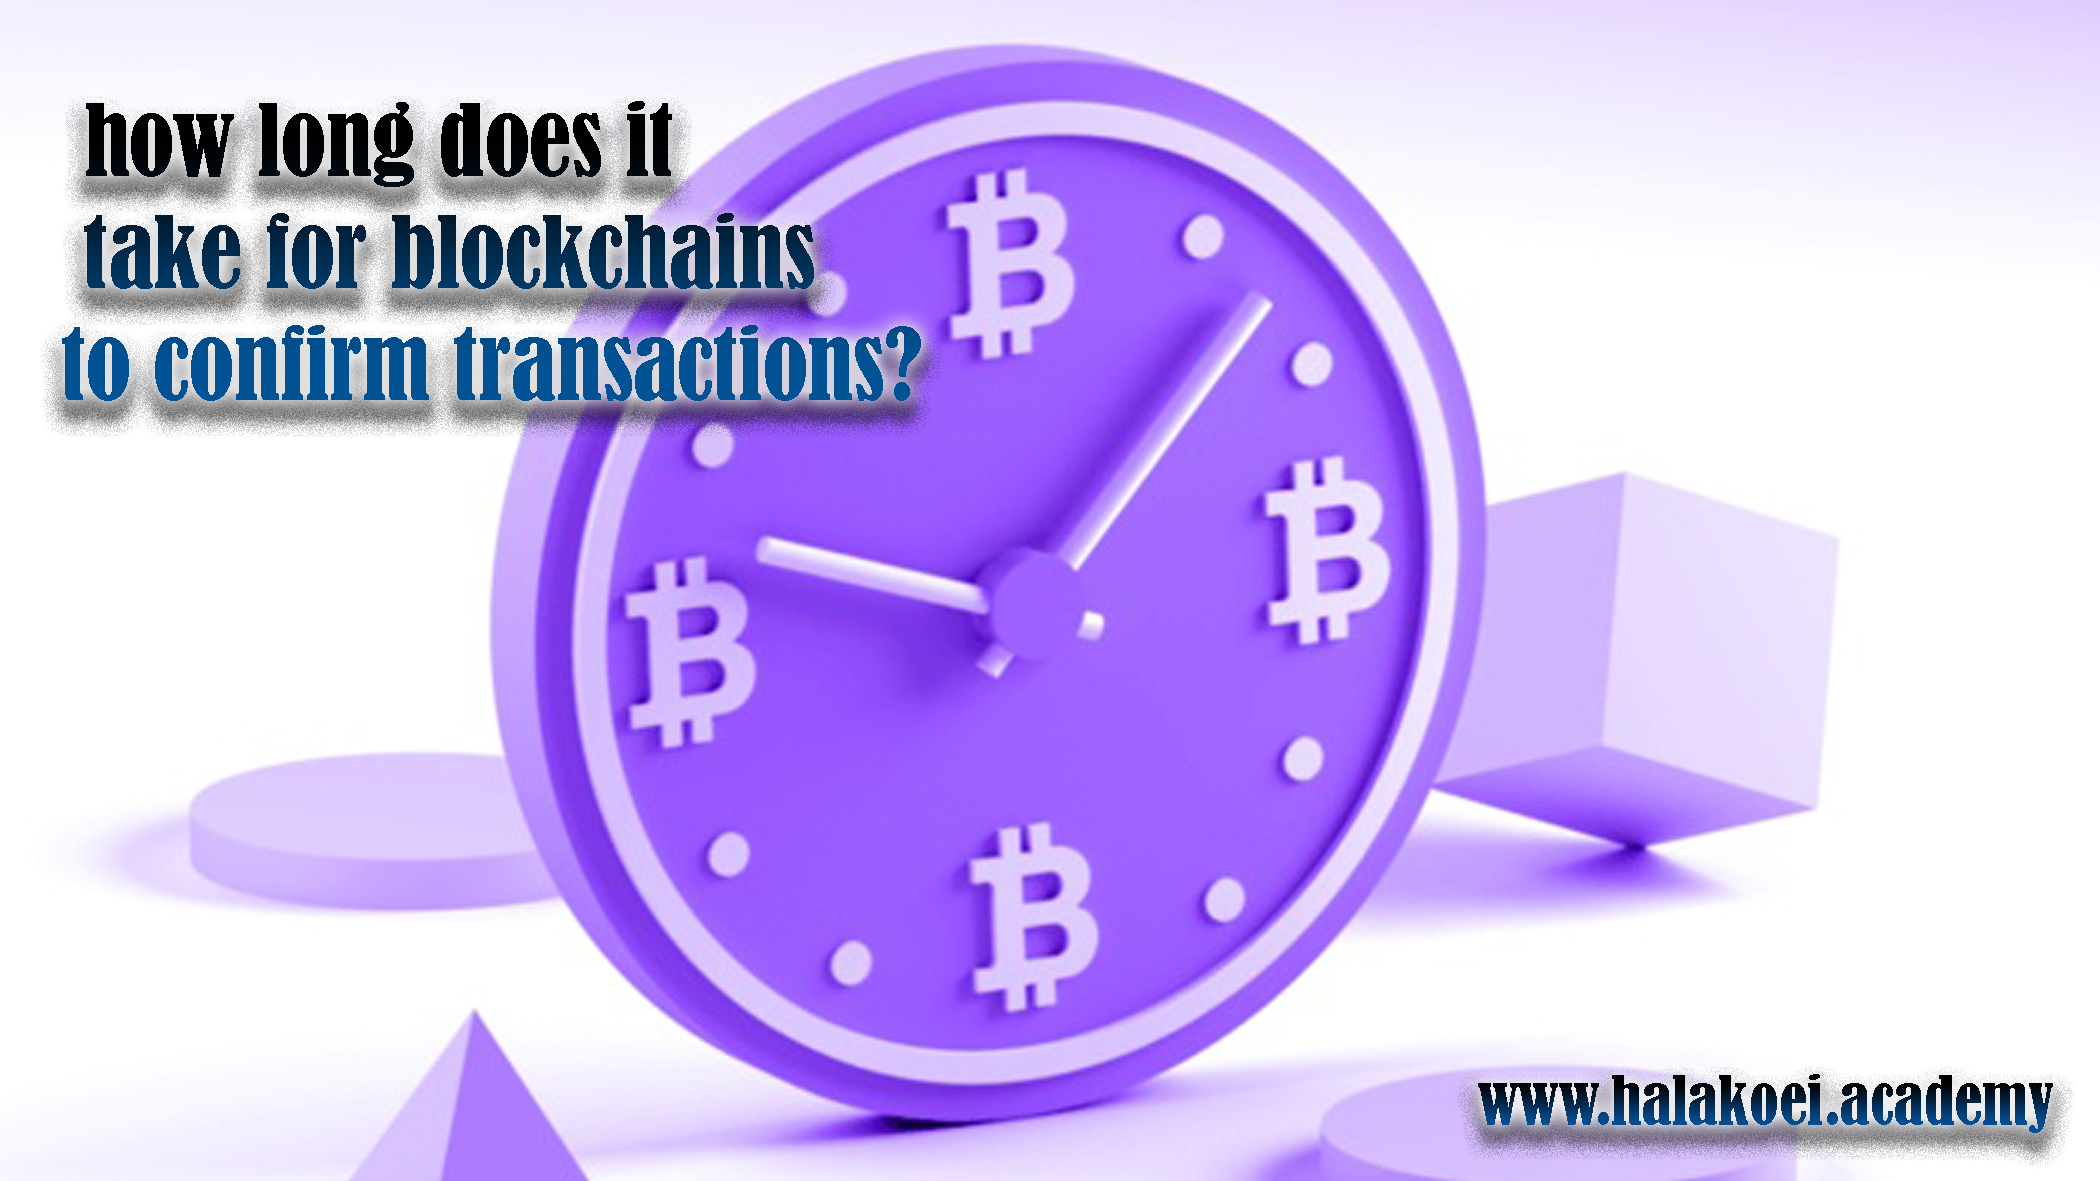 how-long-does-it-take-for-blockchains-to-confirm-transactions